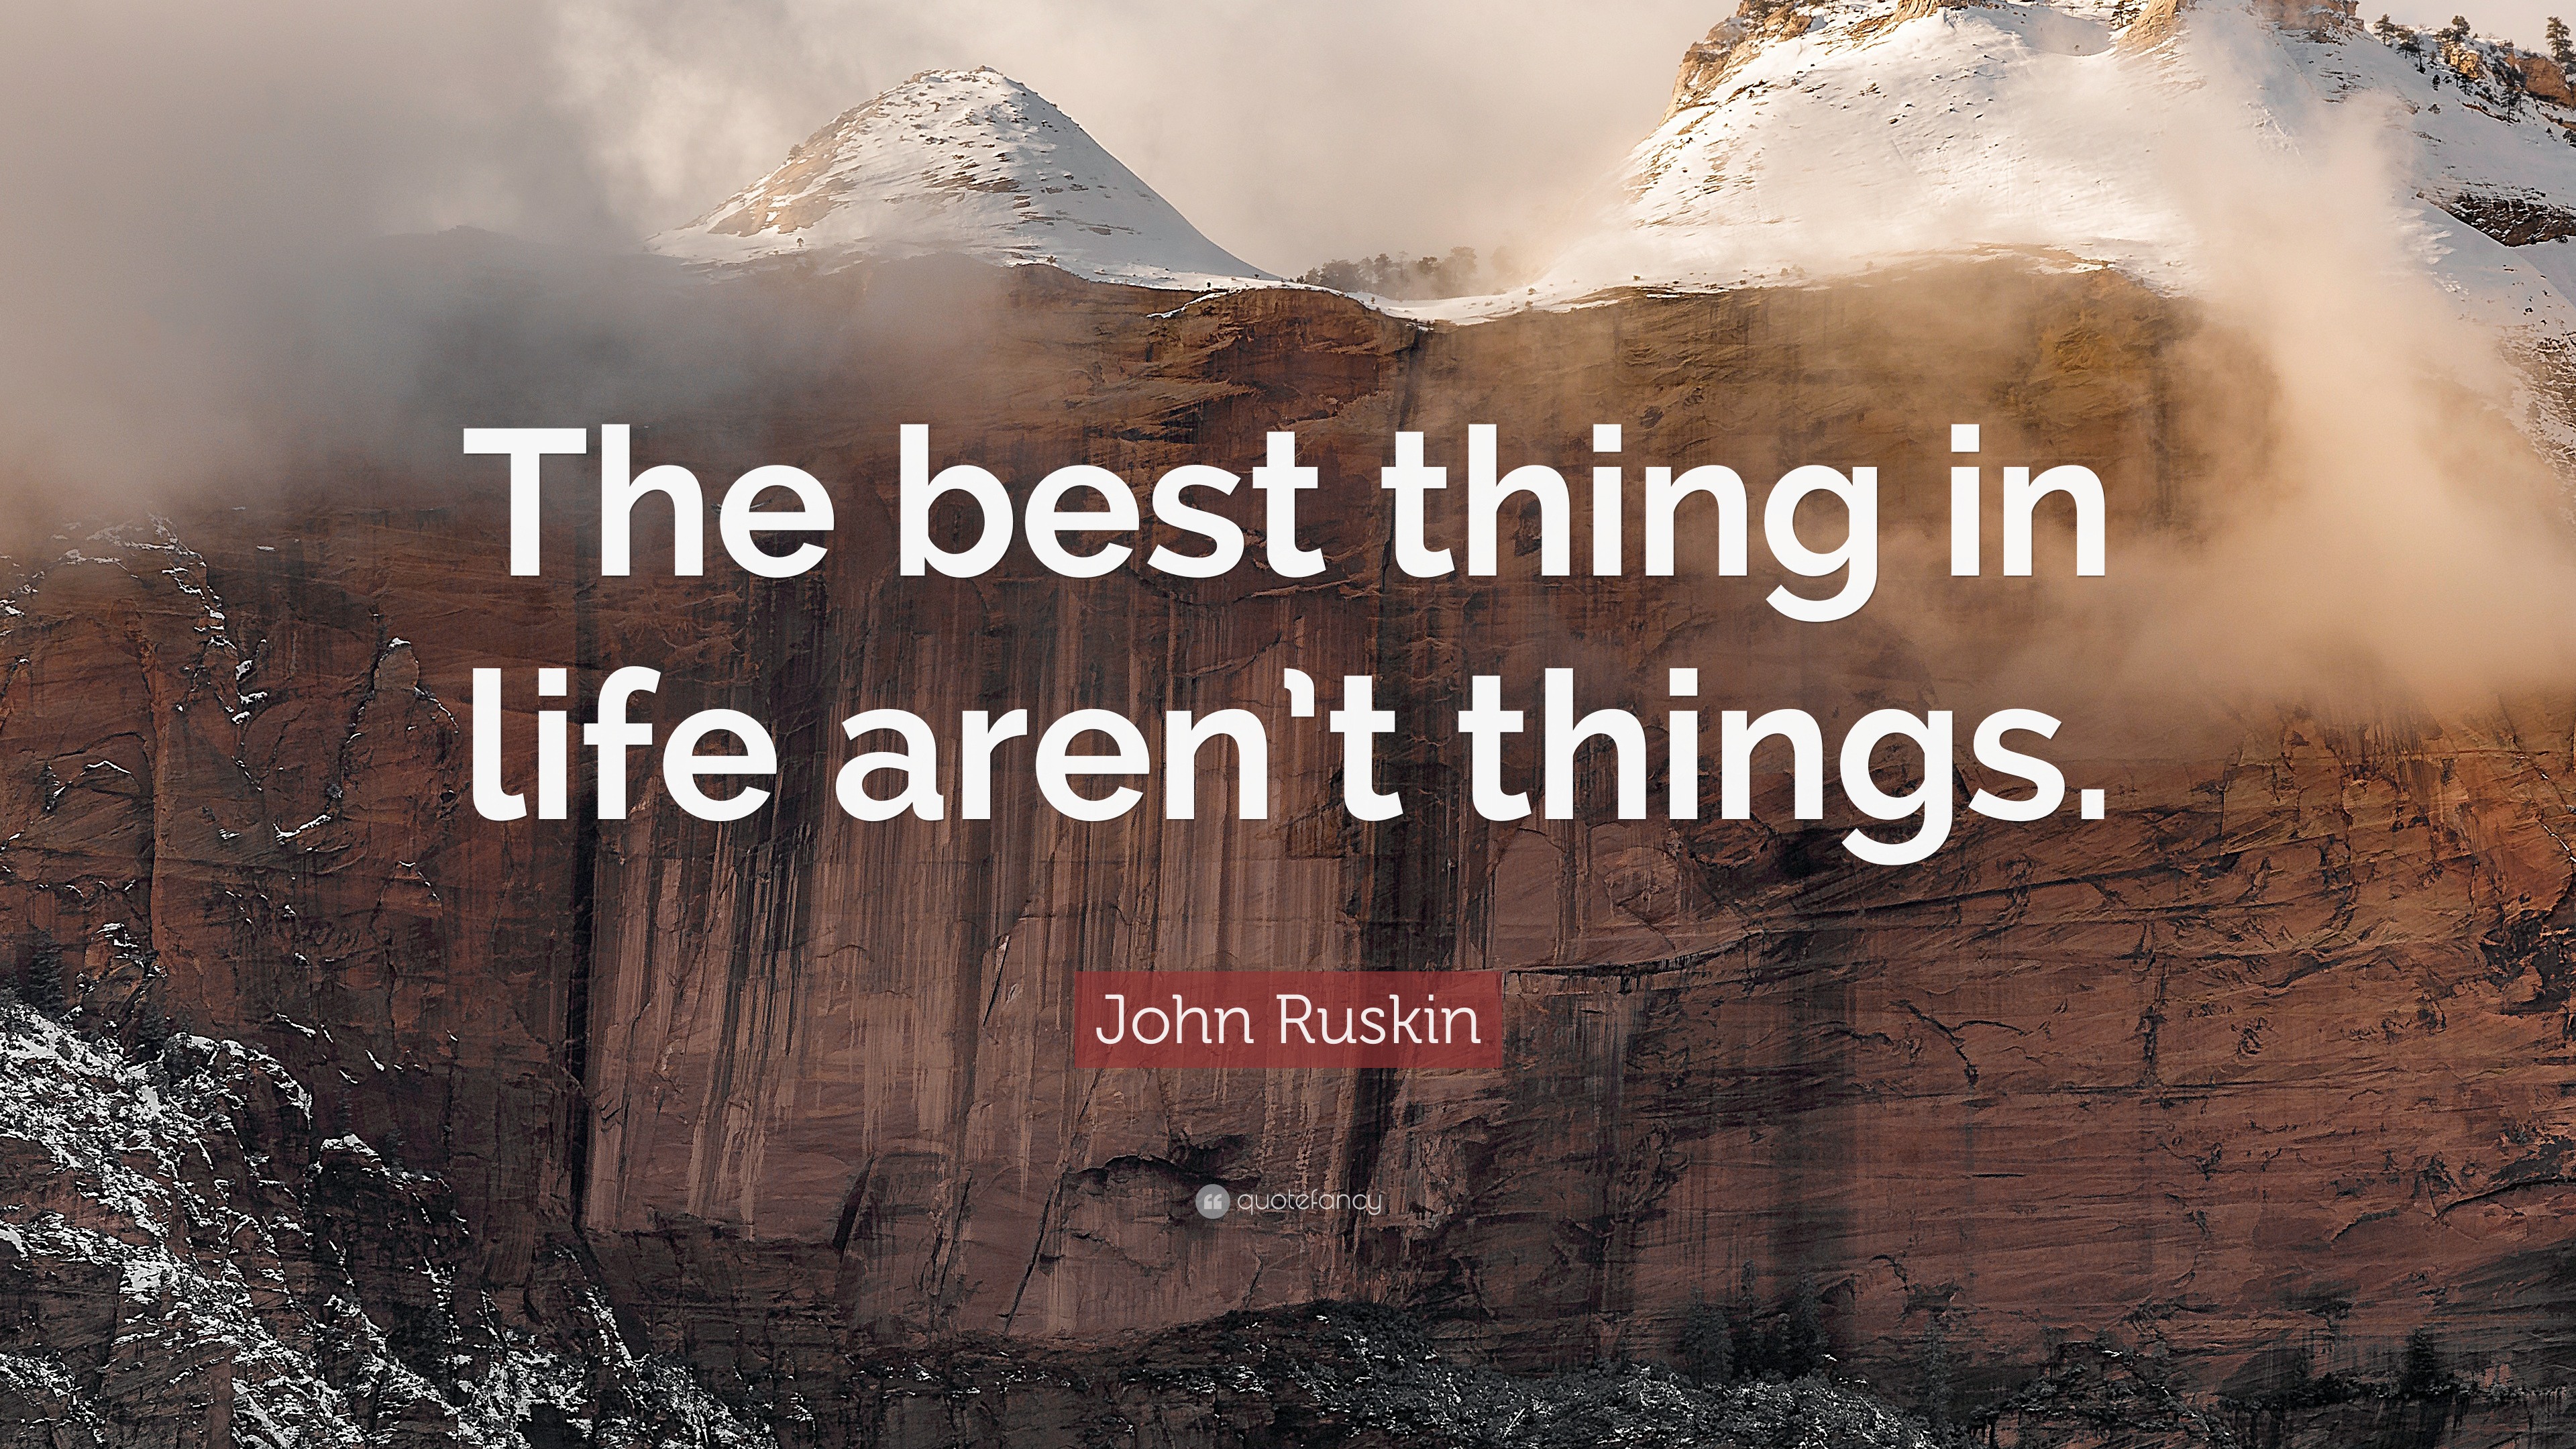 John Ruskin Quote: “The best thing in life aren’t things.” (12